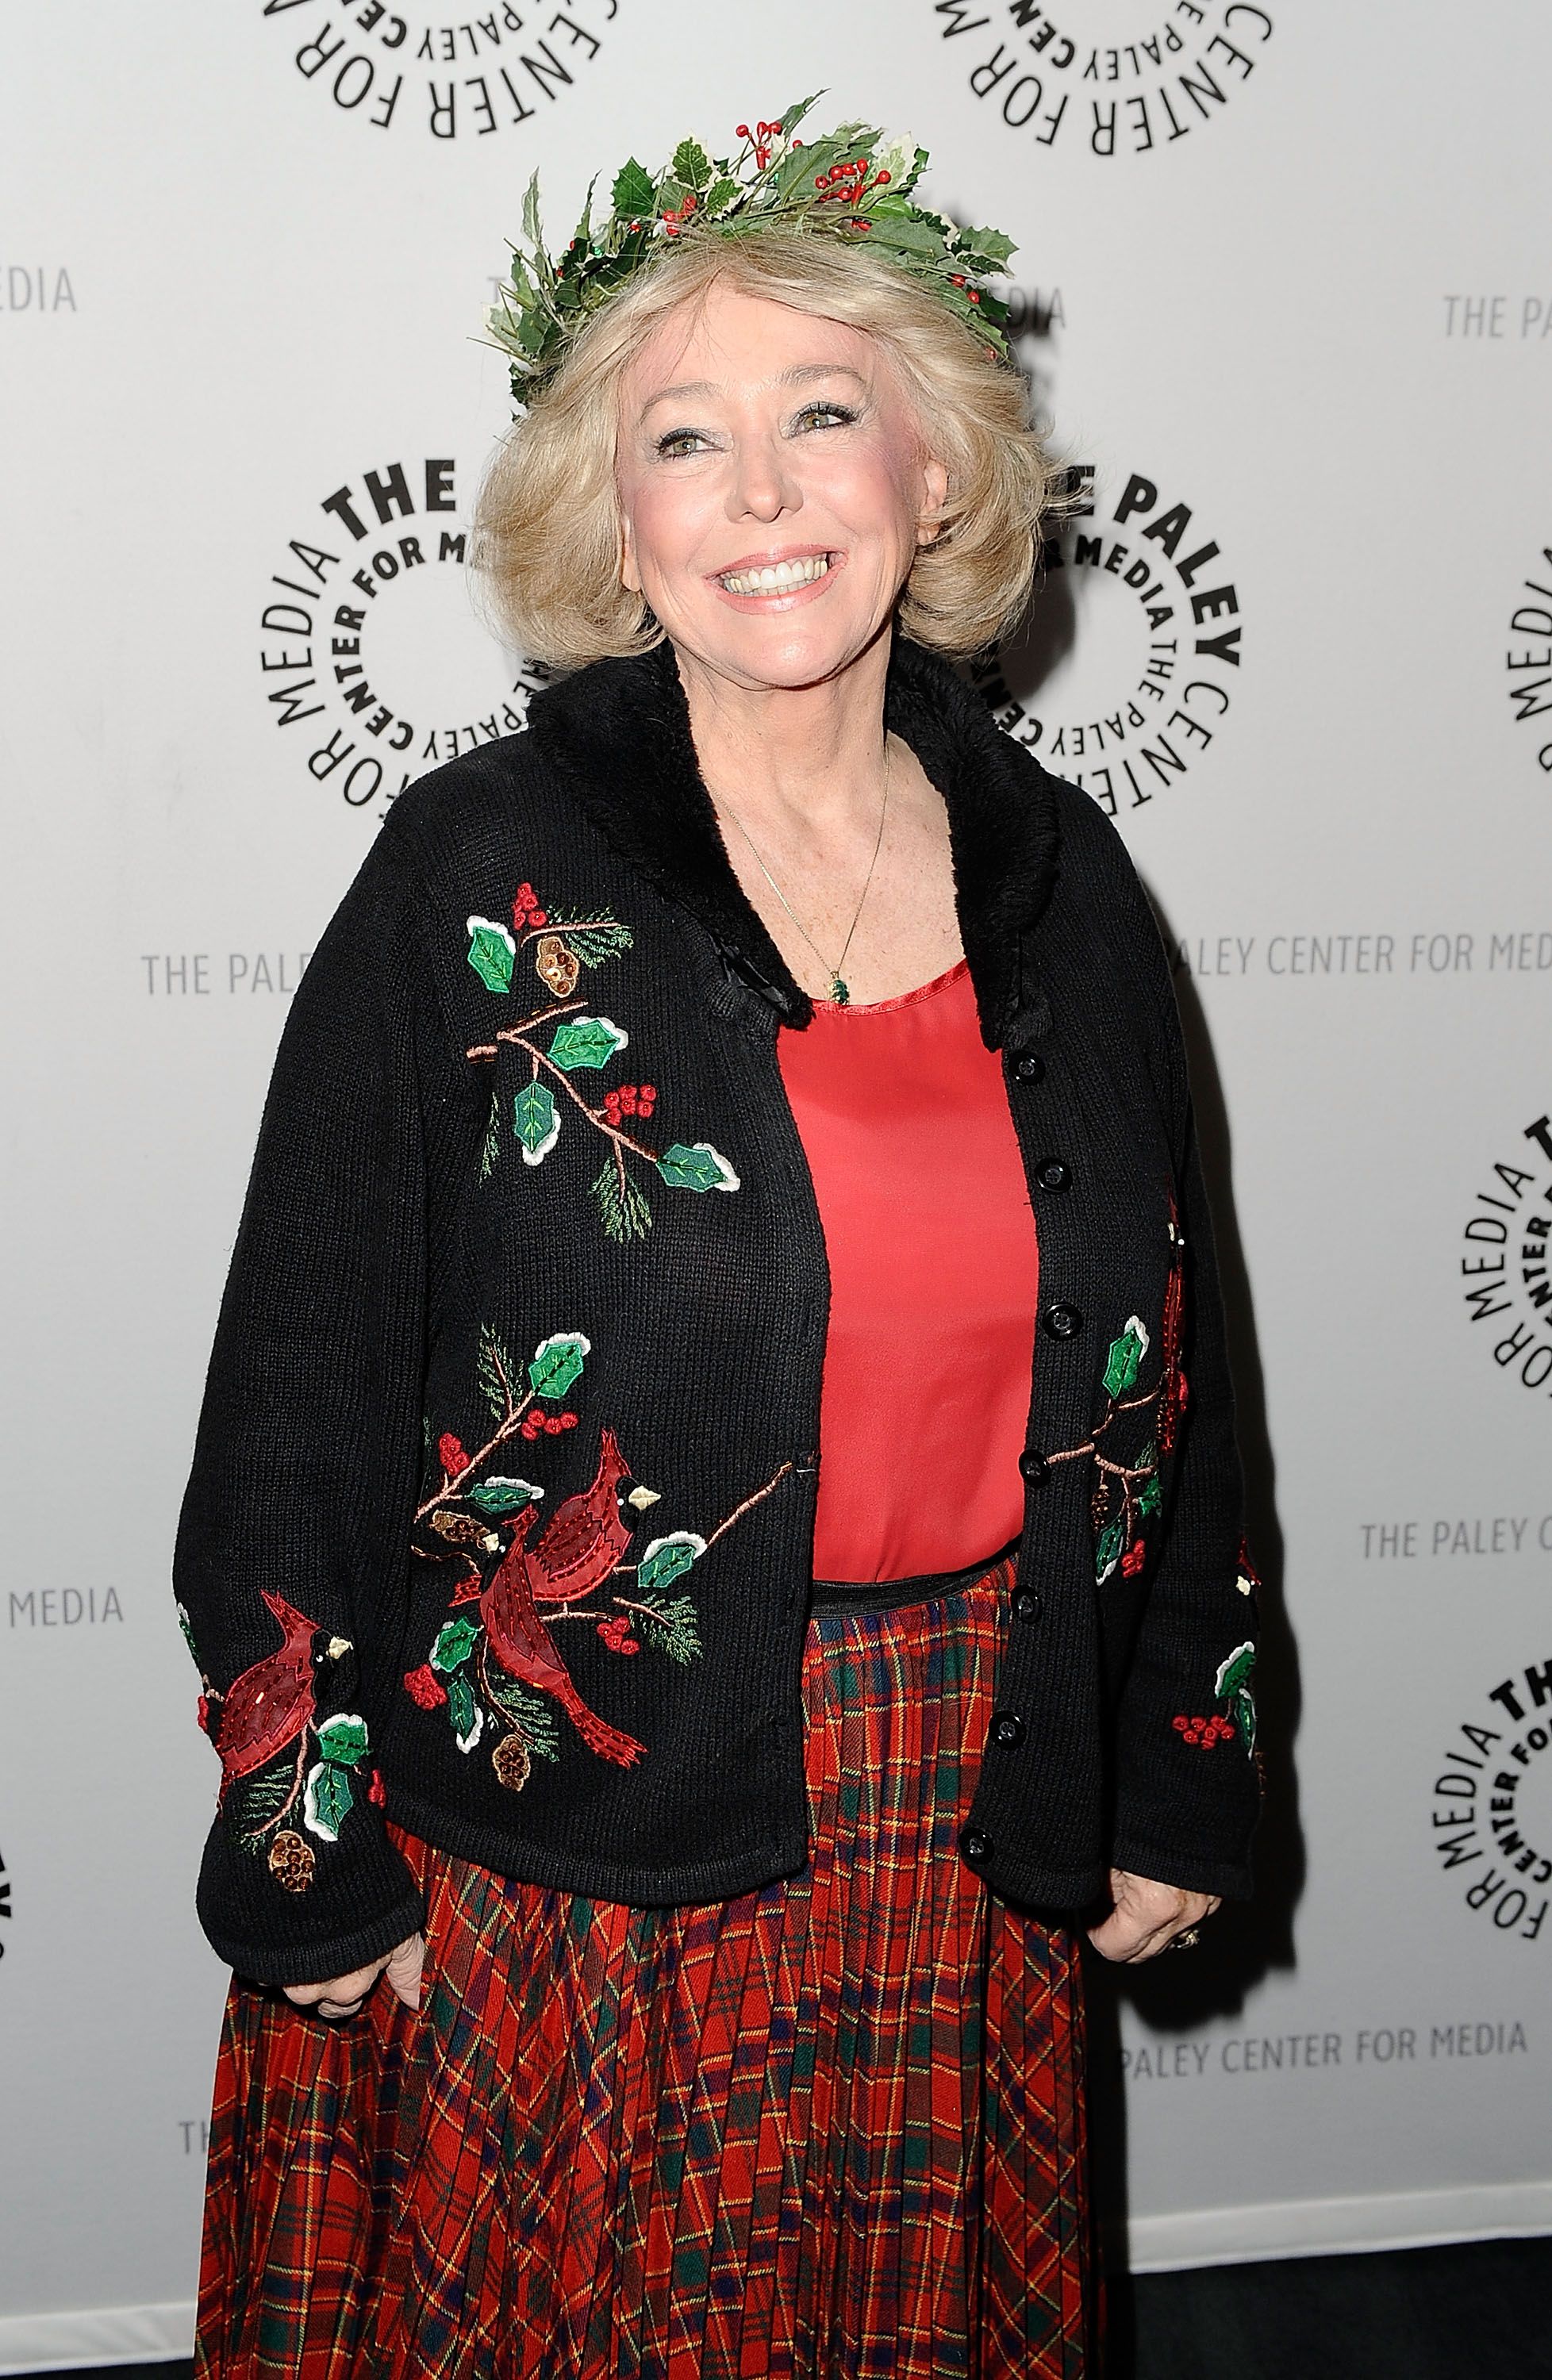 Actress Tina Cole at the Paley Center for Media Presentation of "Christmas with the King Family" at the Paley Center on December 20, 2009 in Beverly Hills, California.| Photo: Getty Images